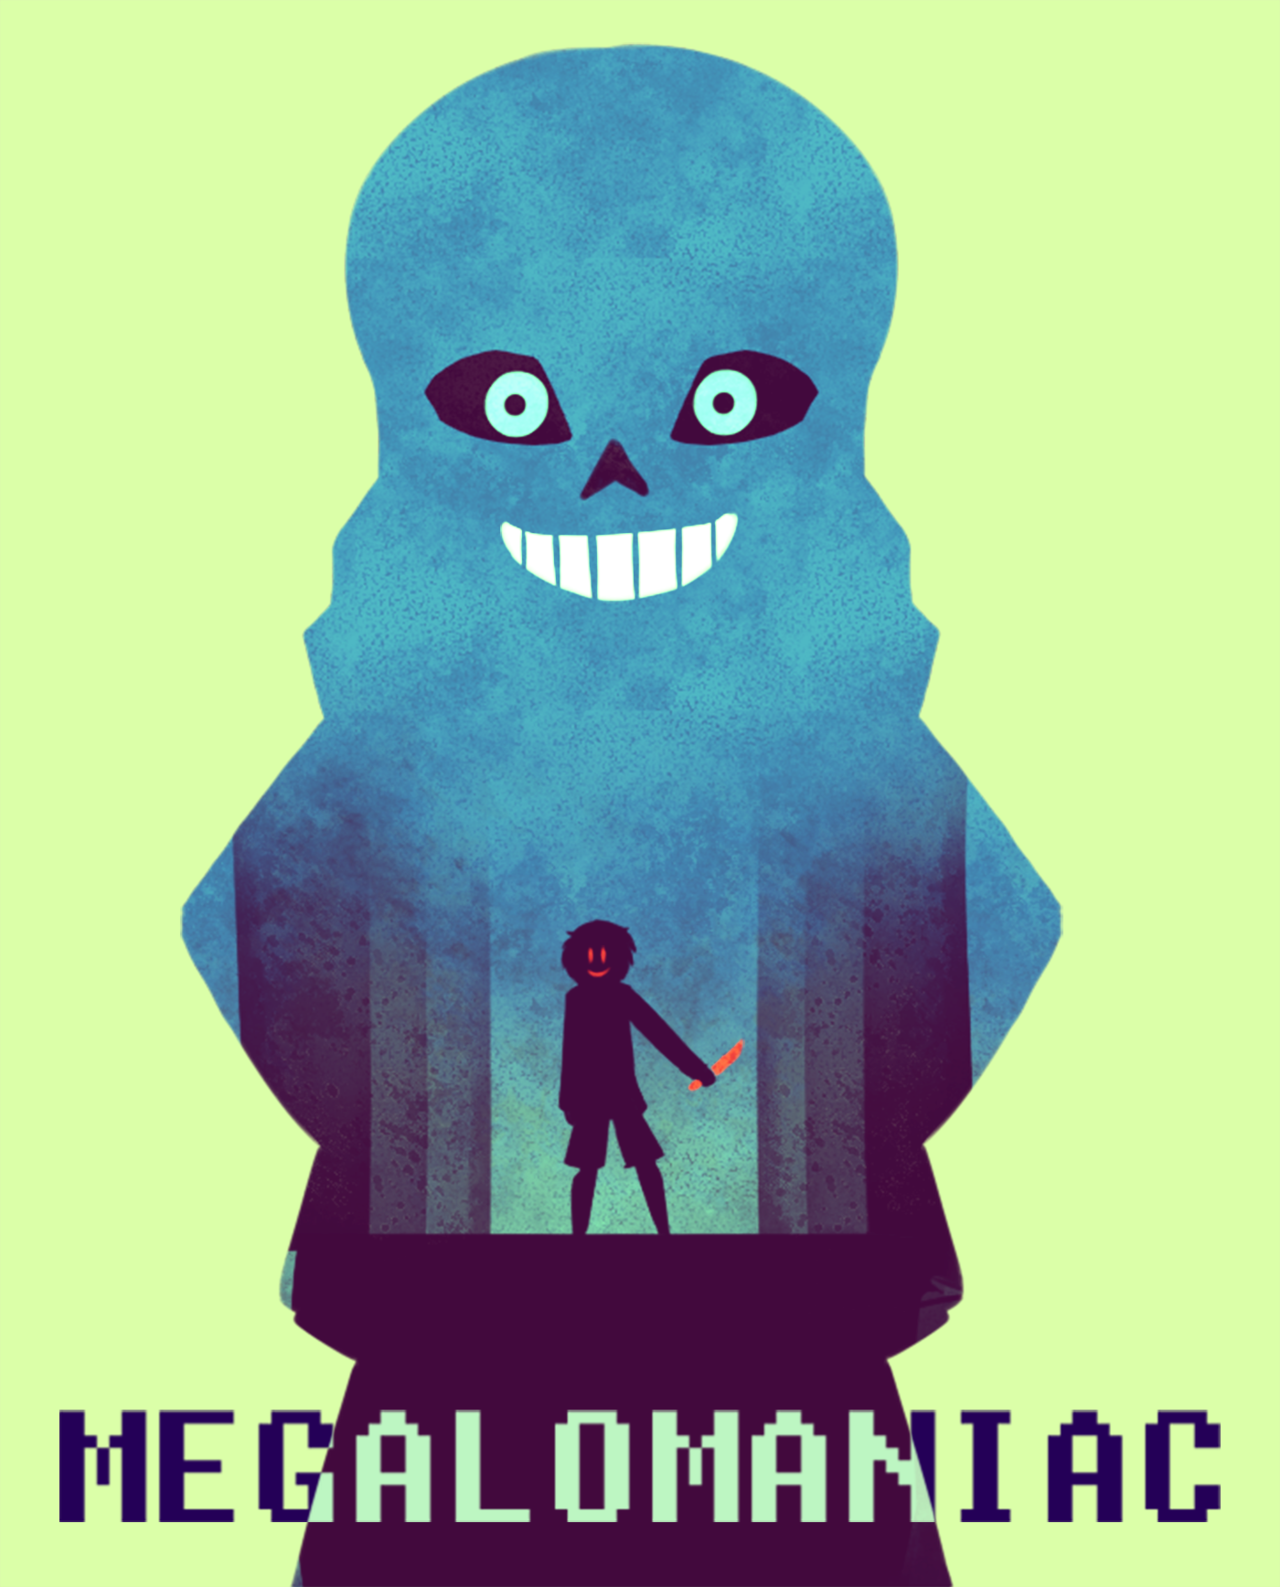 Can Anyone Please Give Me Links For Good Glitchtale Wallpapers For